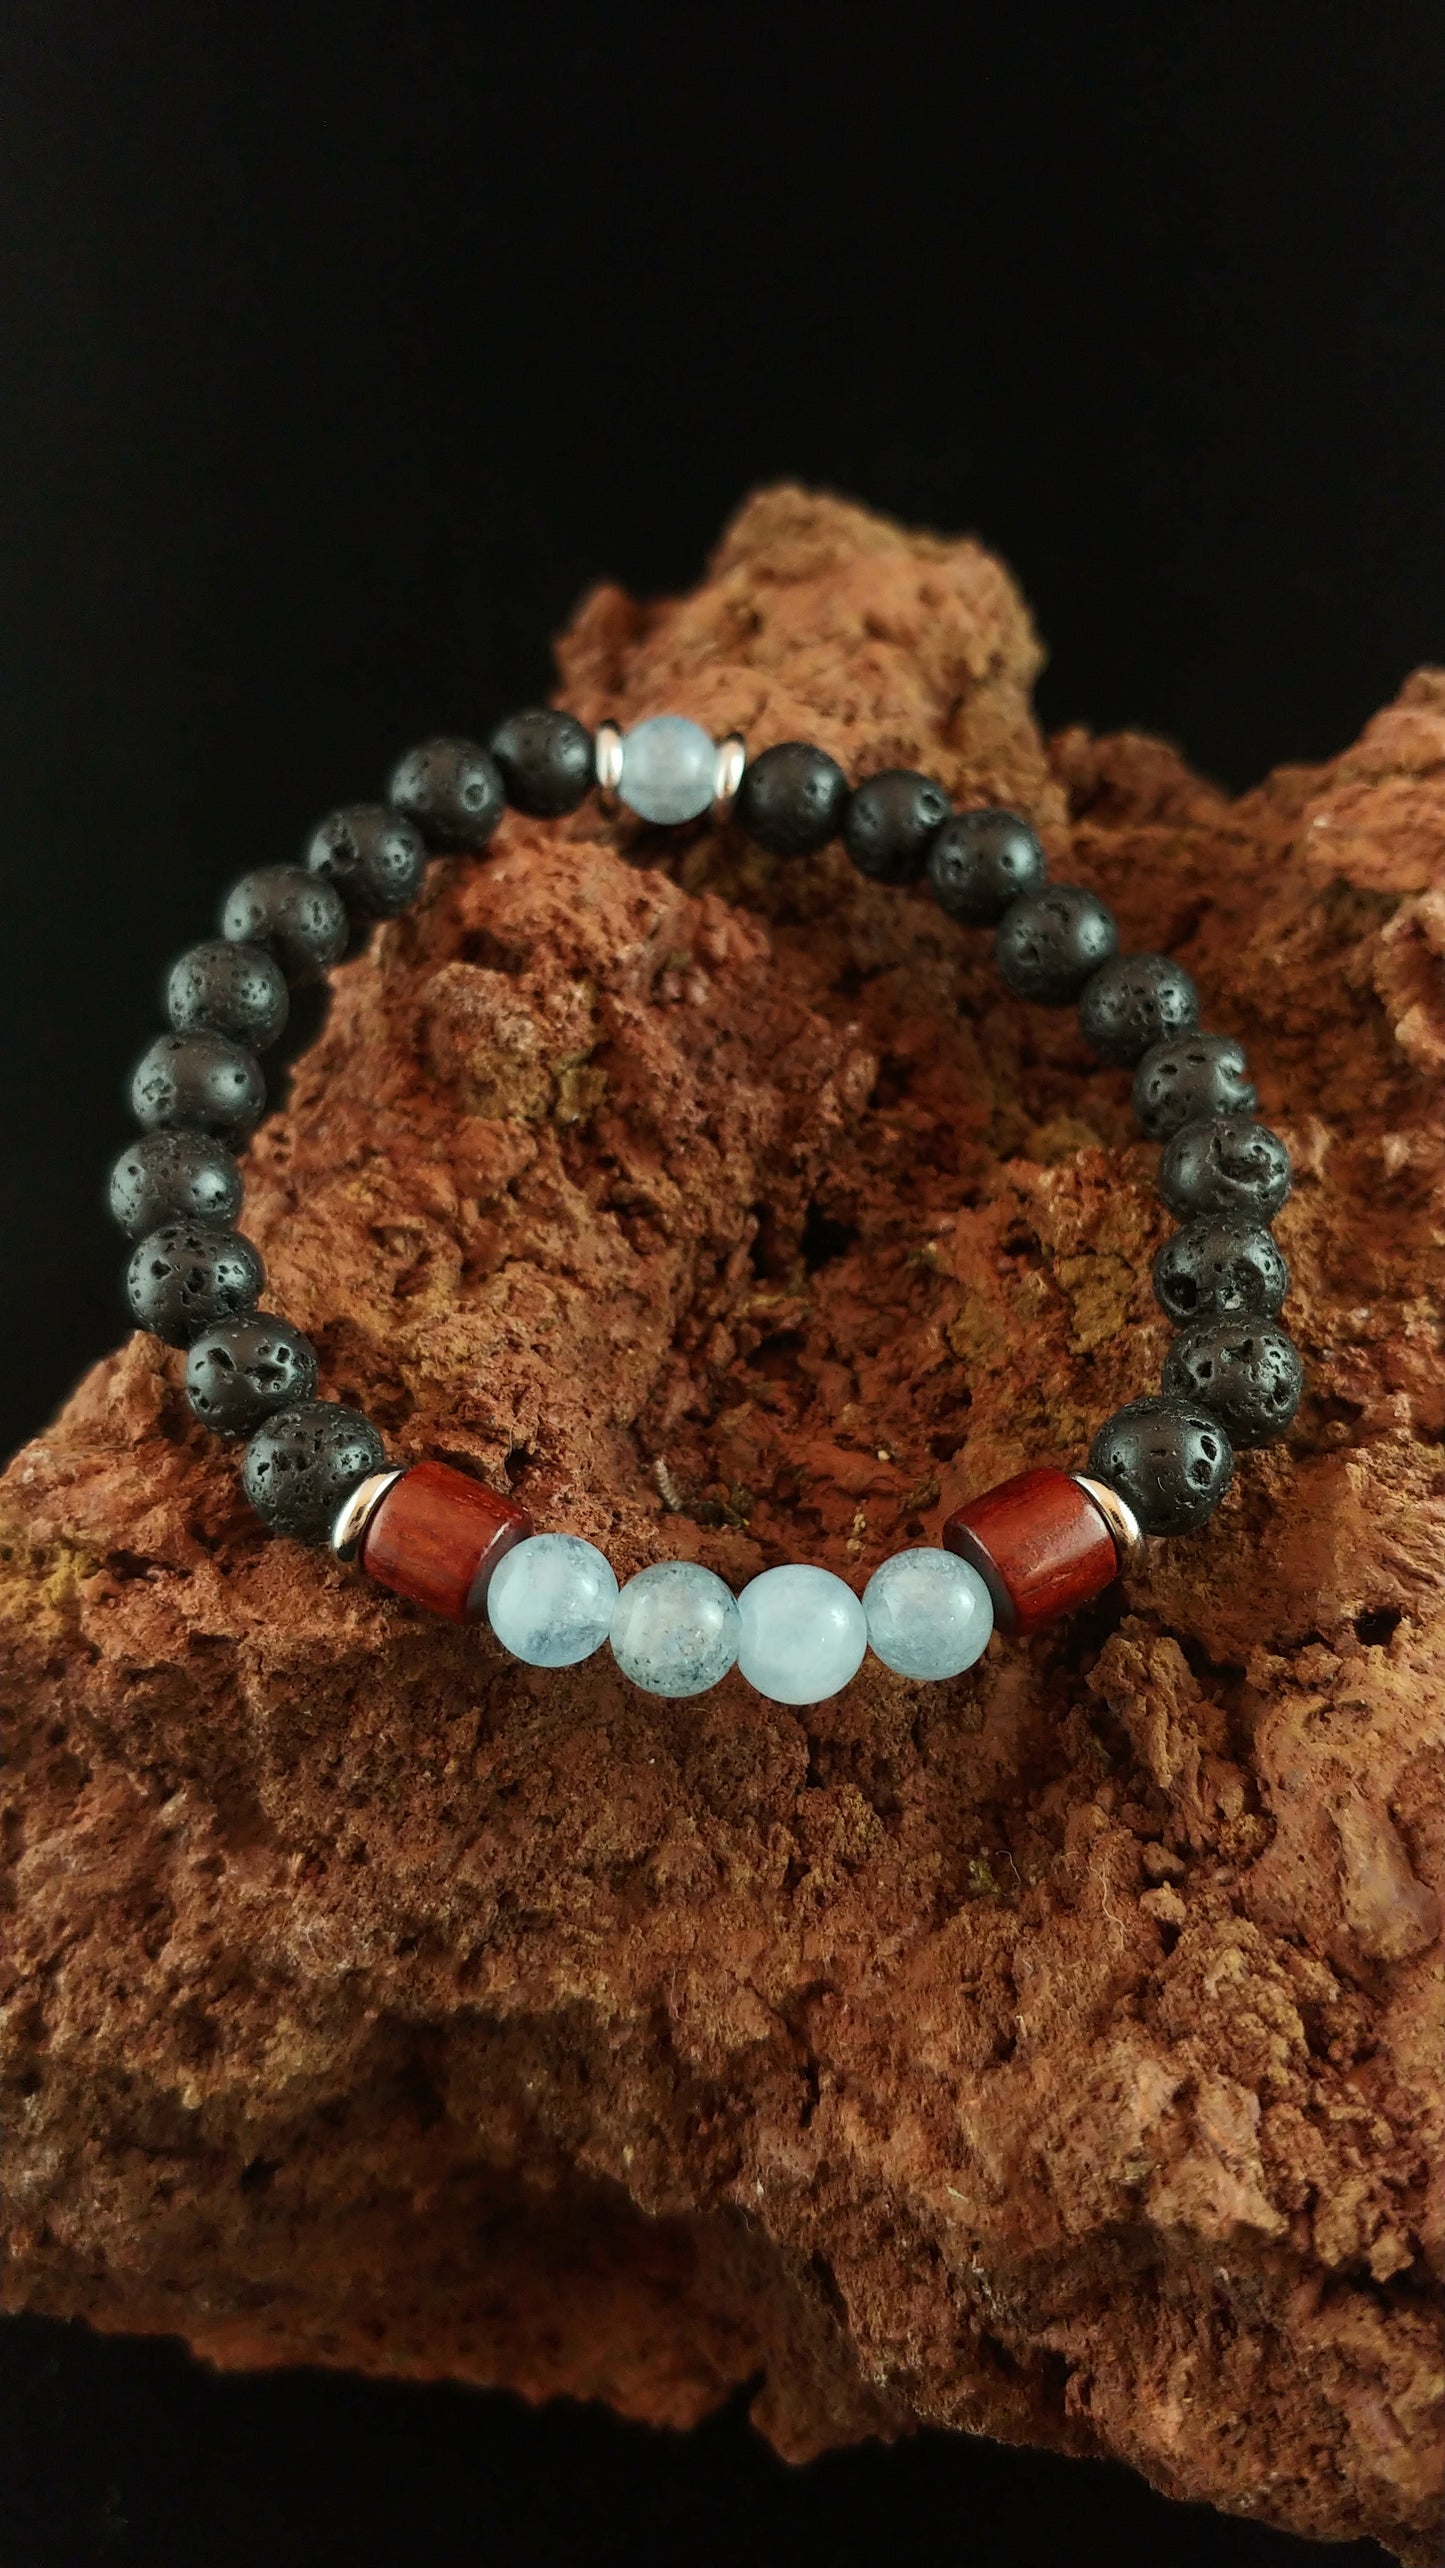 Bracelet being displayed on a dark red volcanic stone. Bracelet has mostly lava beads and bright blue Aquamarine beads. It also has thin golden colored spacers and larger wooden spacers between the lava and the aquamarine.